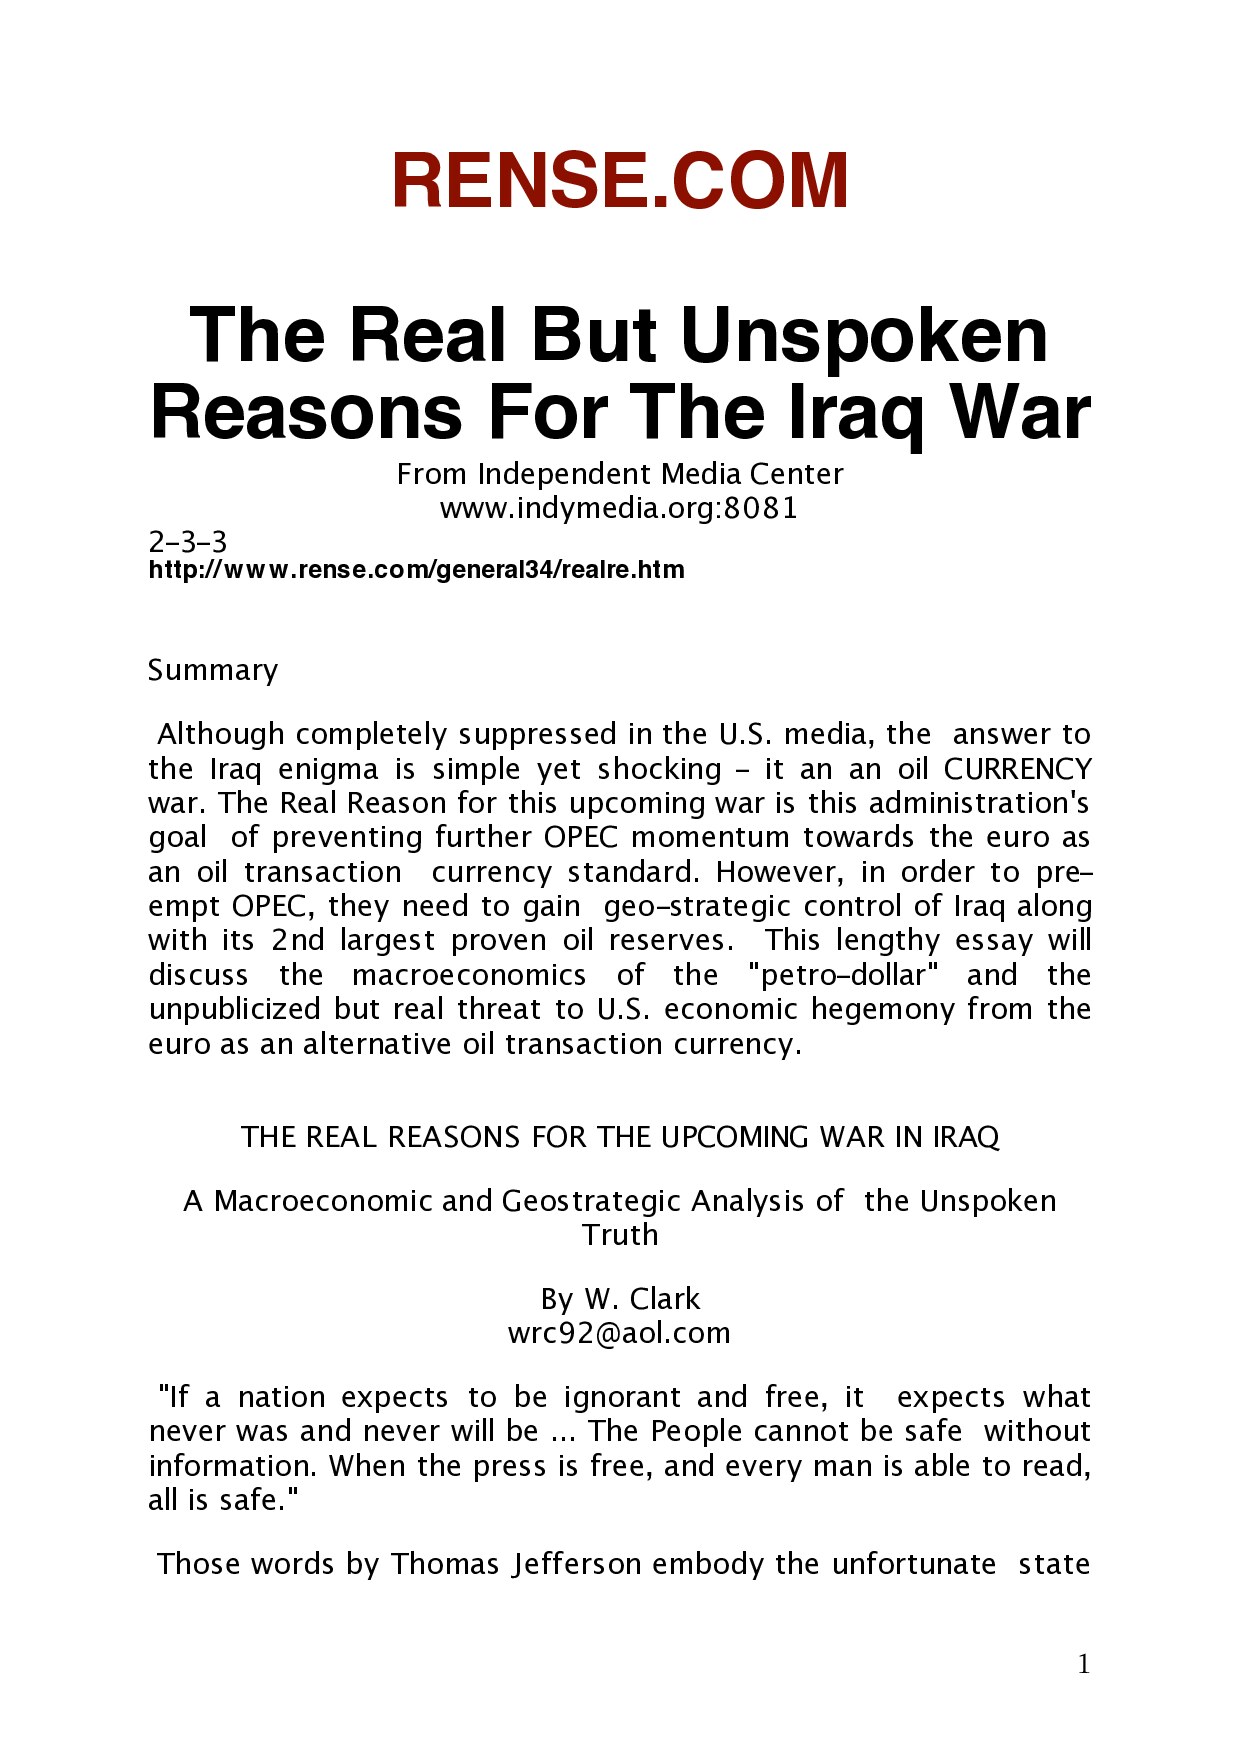 Independent Media Center; The Real But Unspoken Reasons For The Iraq War